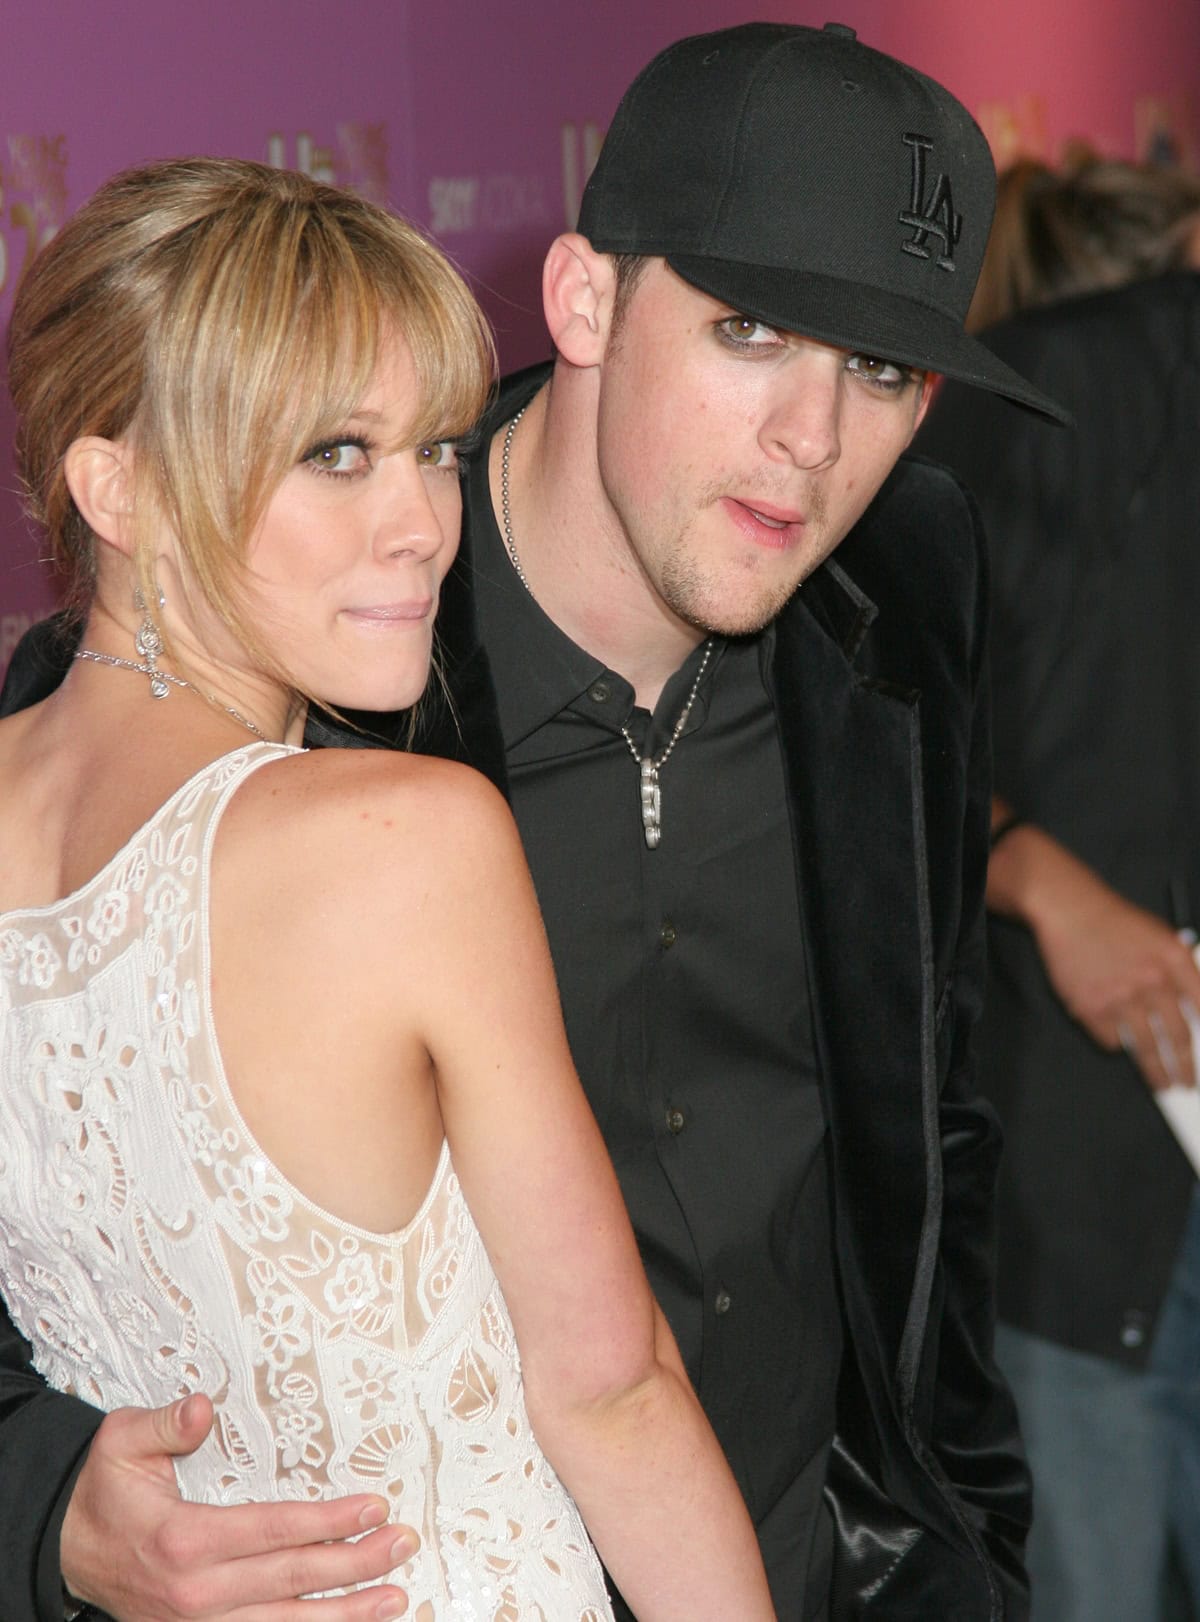 Hilary Duff and Joel Madden had a high-profile relationship from 2004 to 2006, starting when she was 16 and he was 25